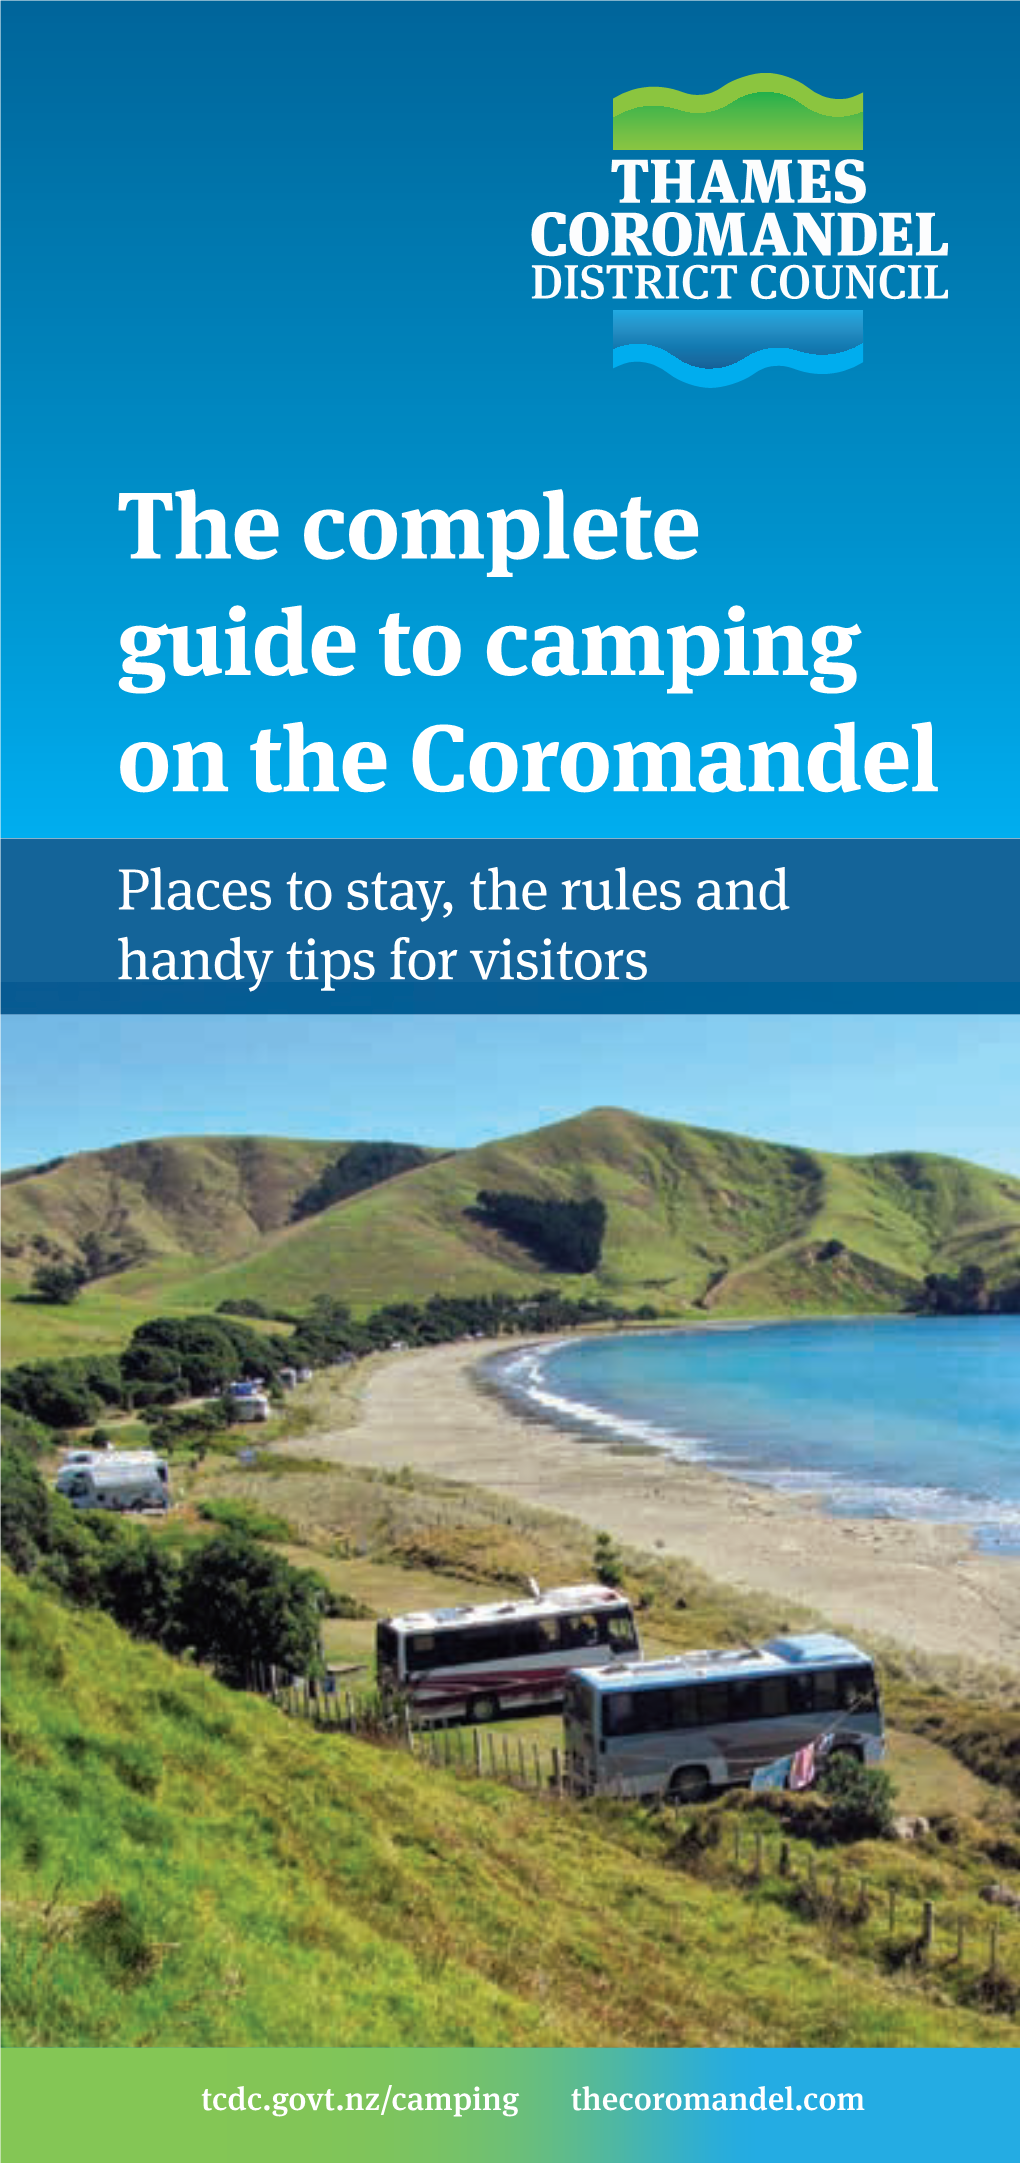 The Complete Guide to Camping on the Coromandel Places to Stay, the Rules and Handy Tips for Visitors